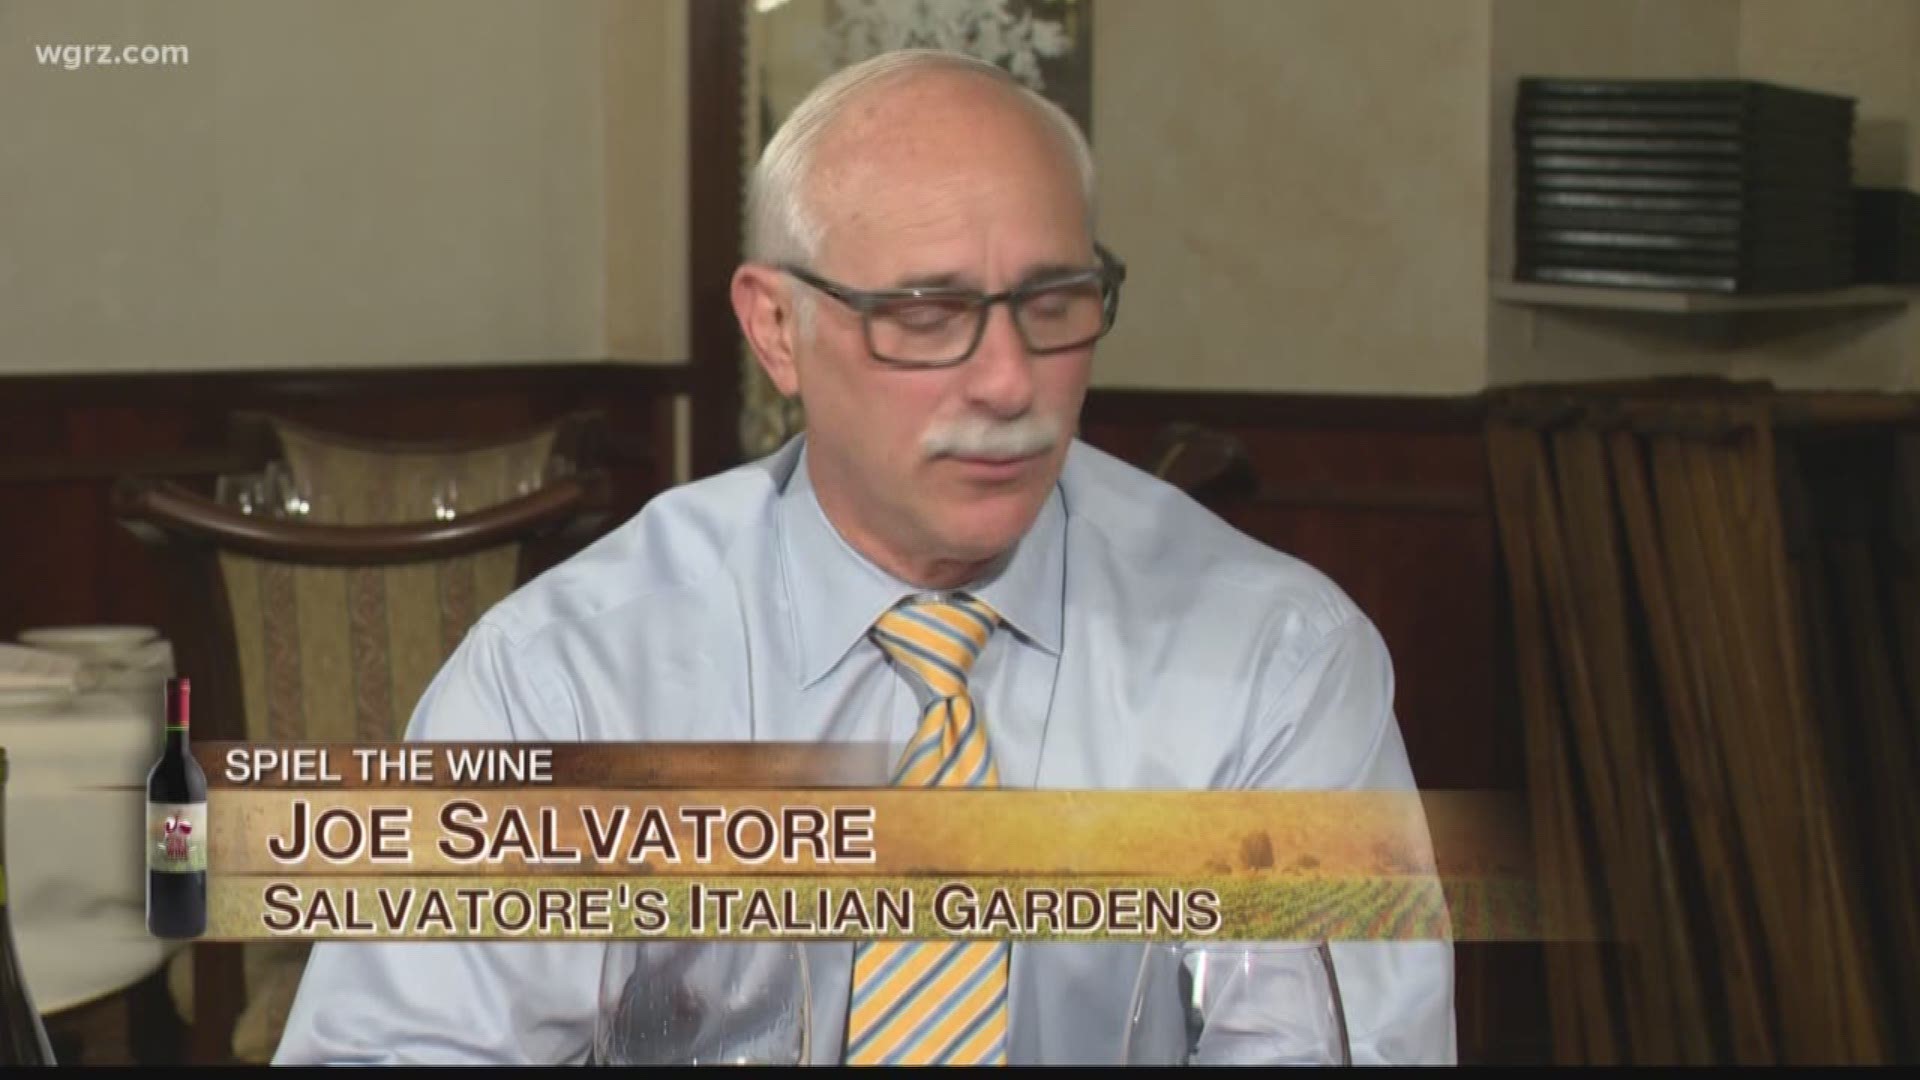 Kevin is joined by Joe Salvatore at Salvatore's Italian Gardens